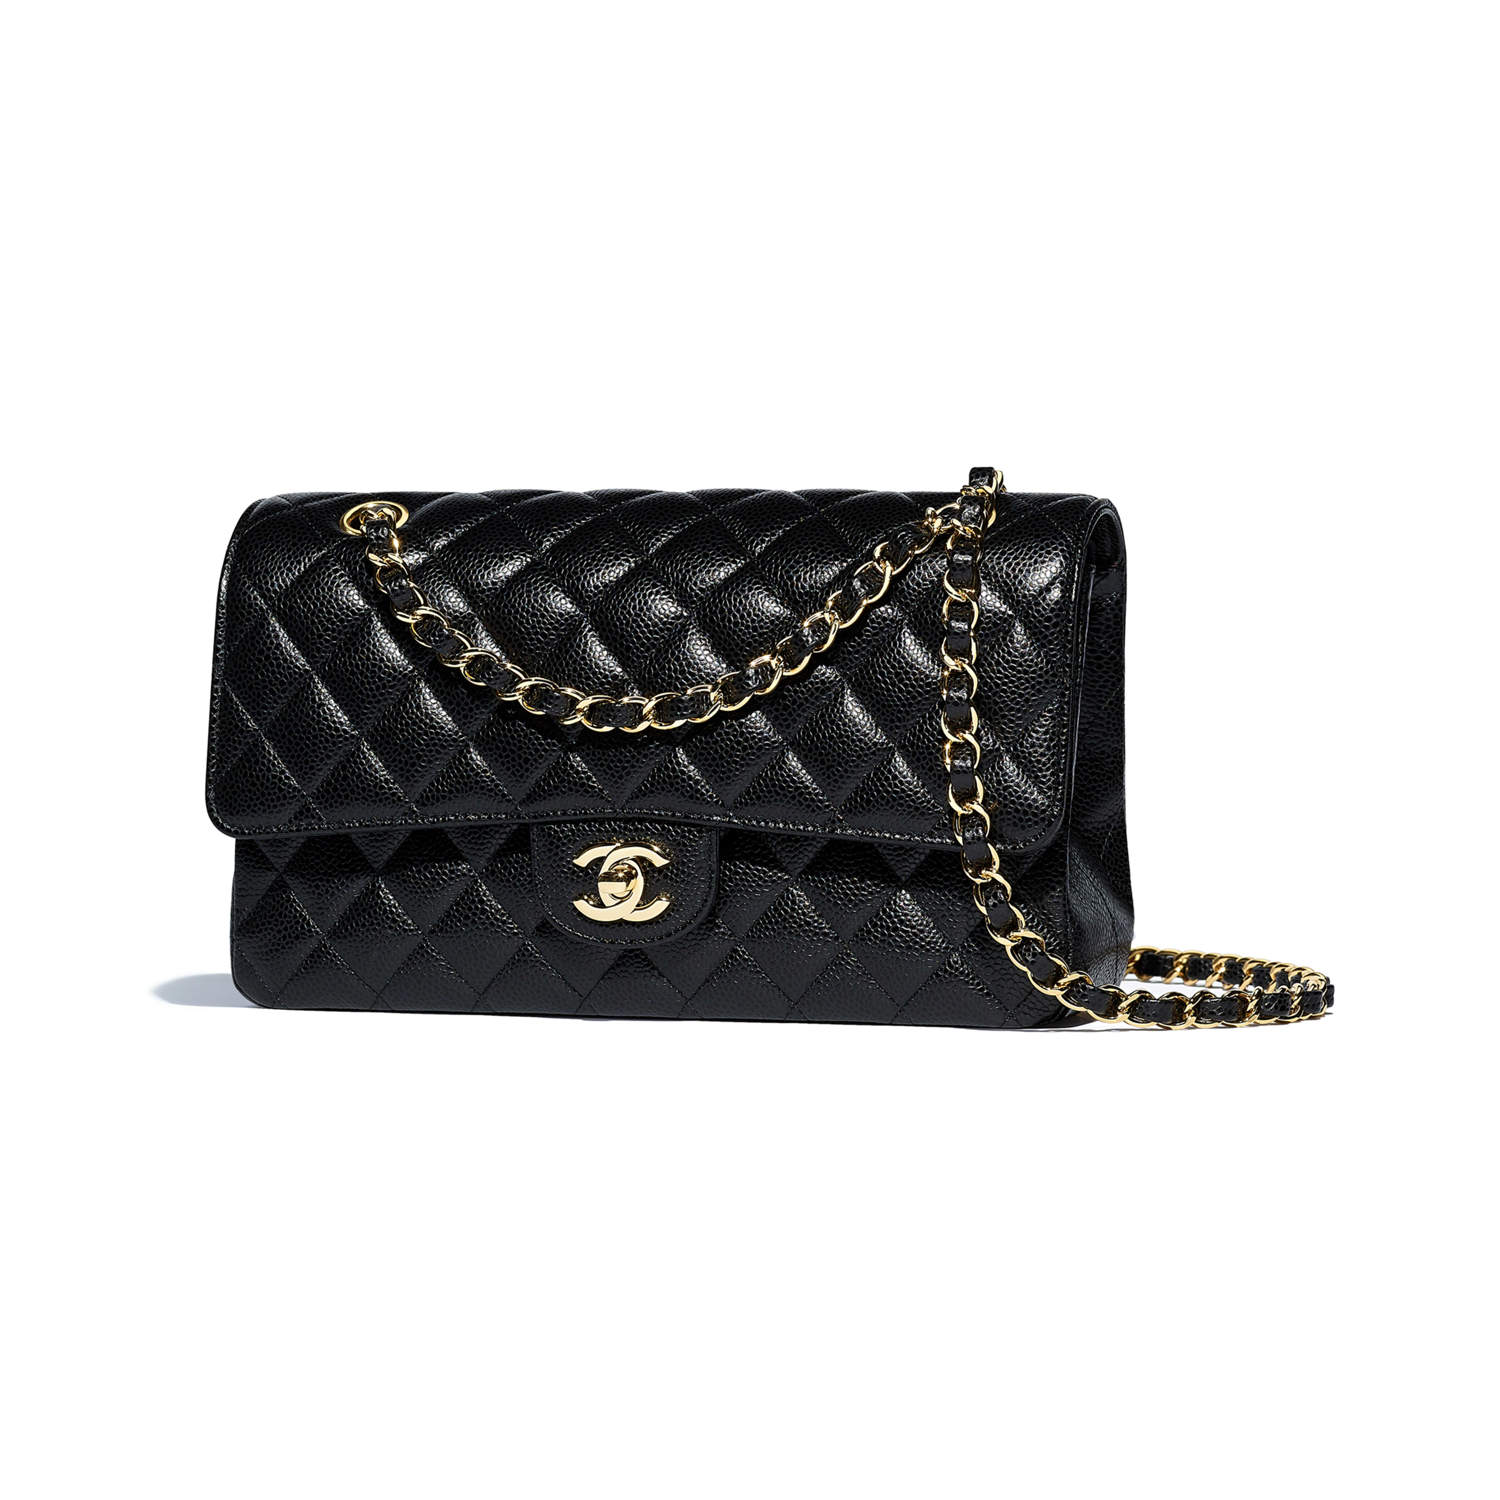 Helper 'Borrows' Chanel Bags To Use On Off-Days, Jailed 6 Months After ...